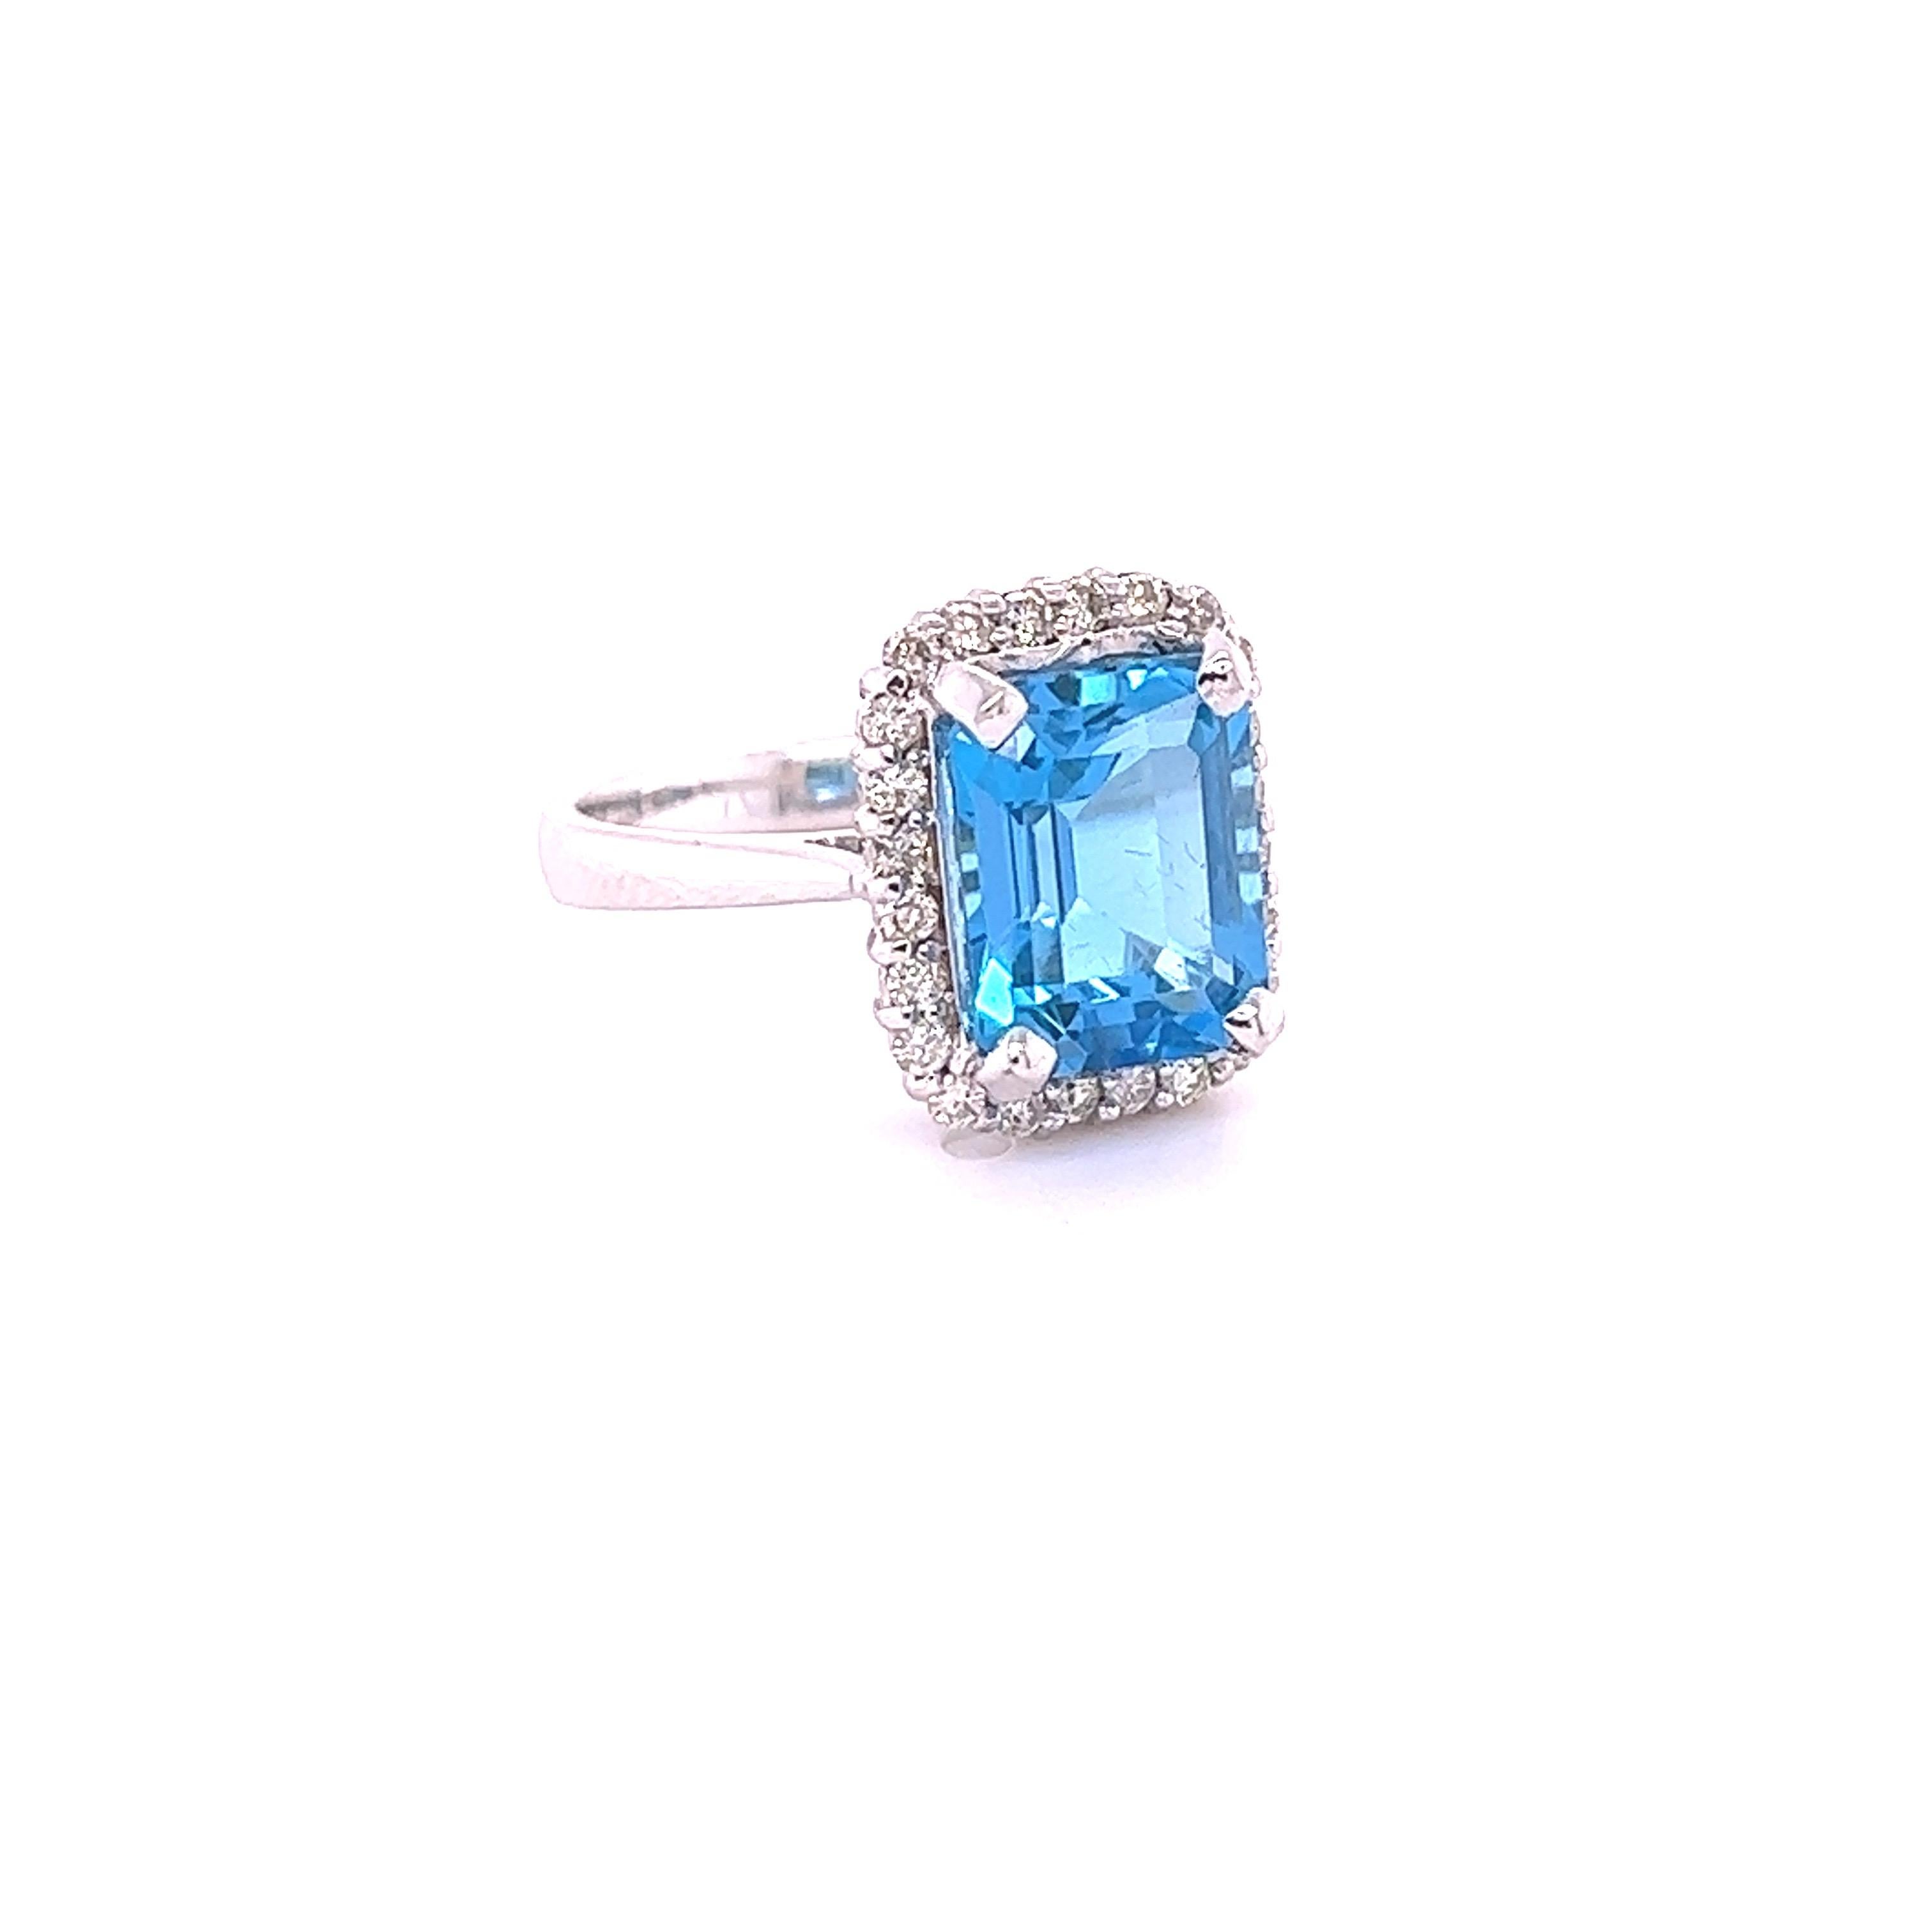 This ring has a Emerald Cut Blue Topaz that weighs 5.78 carats and measures at 11 mm x 9 mm. 

It is surrounded by a simple halo of 24 Round Cut Diamonds that weigh 0.44 Carats. 

It is crafted in 14 Karat White Gold and weighs approximately 5.7